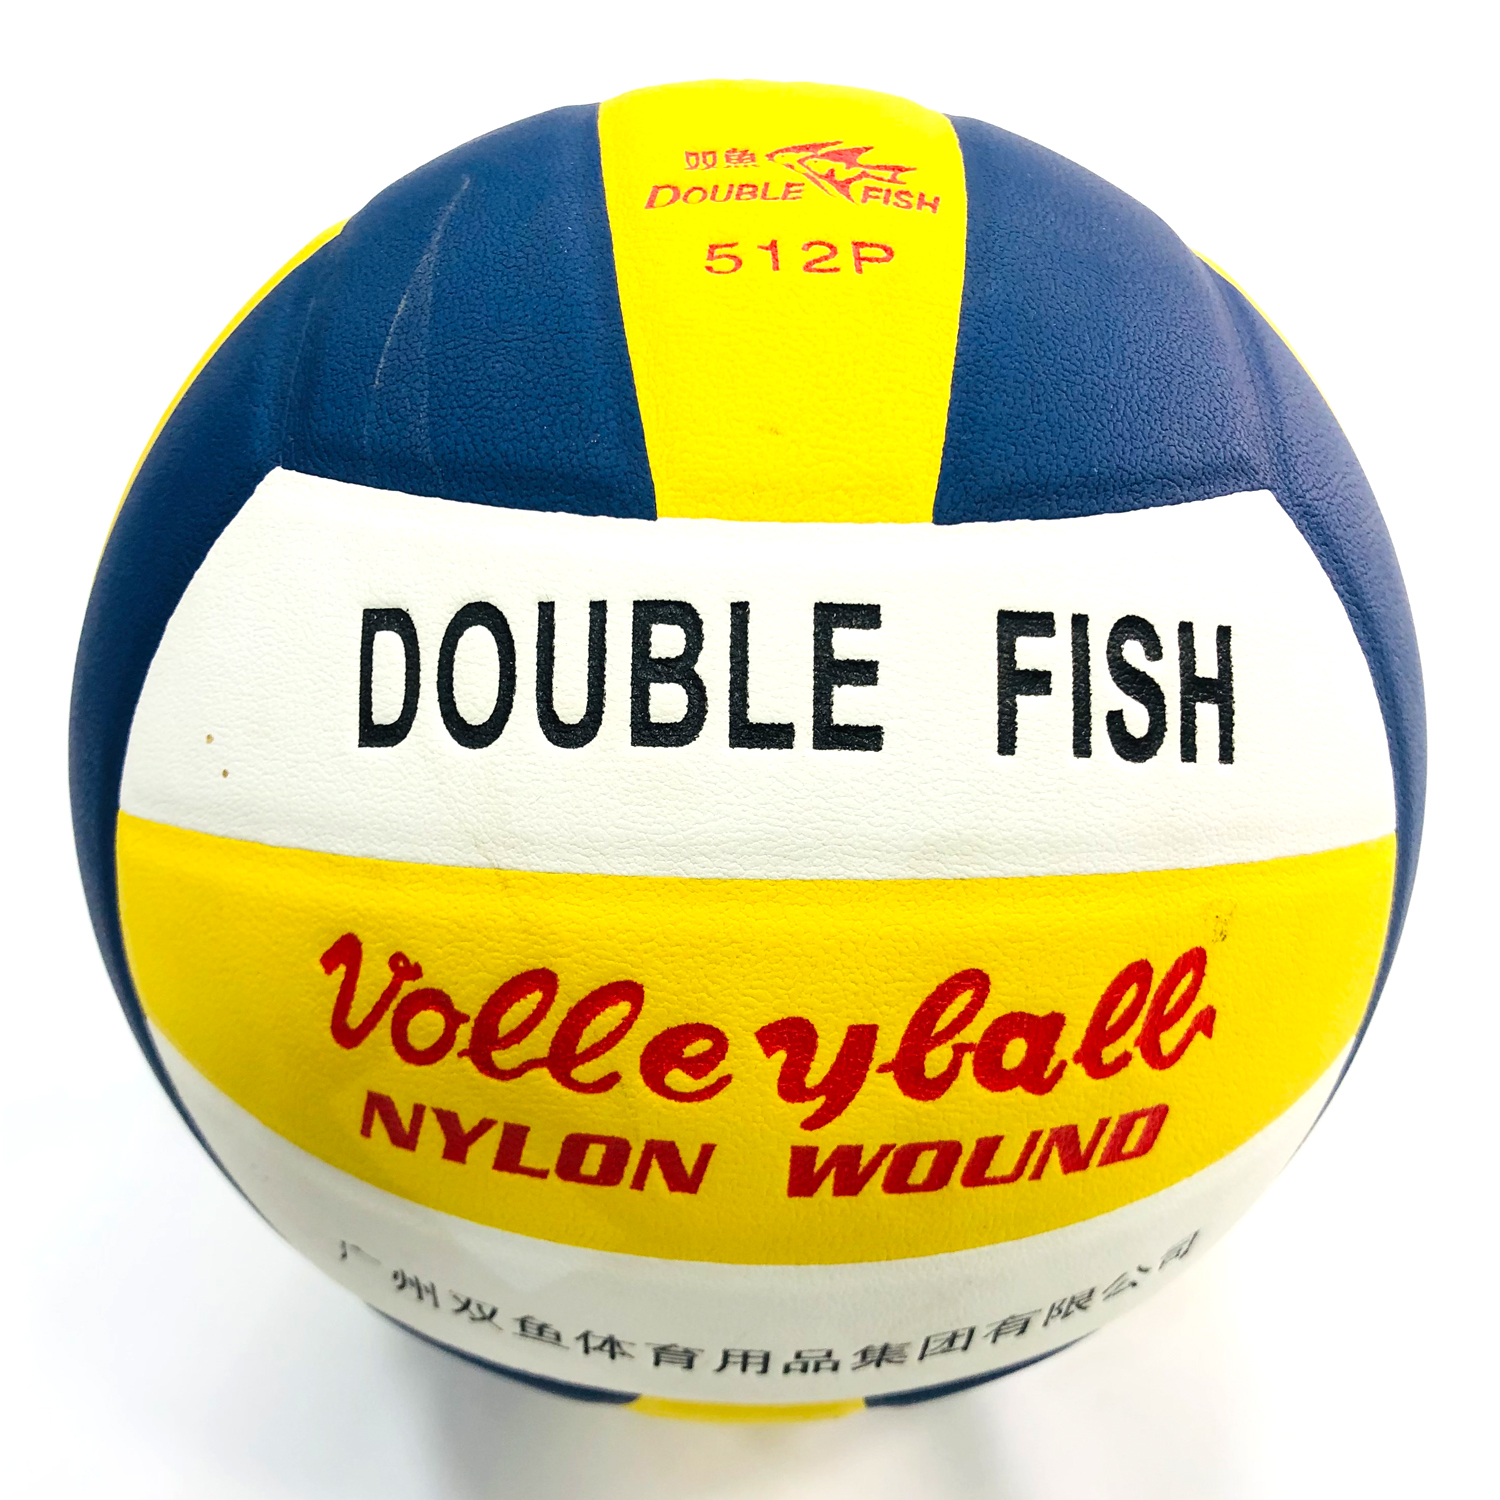 Double fish volleyball